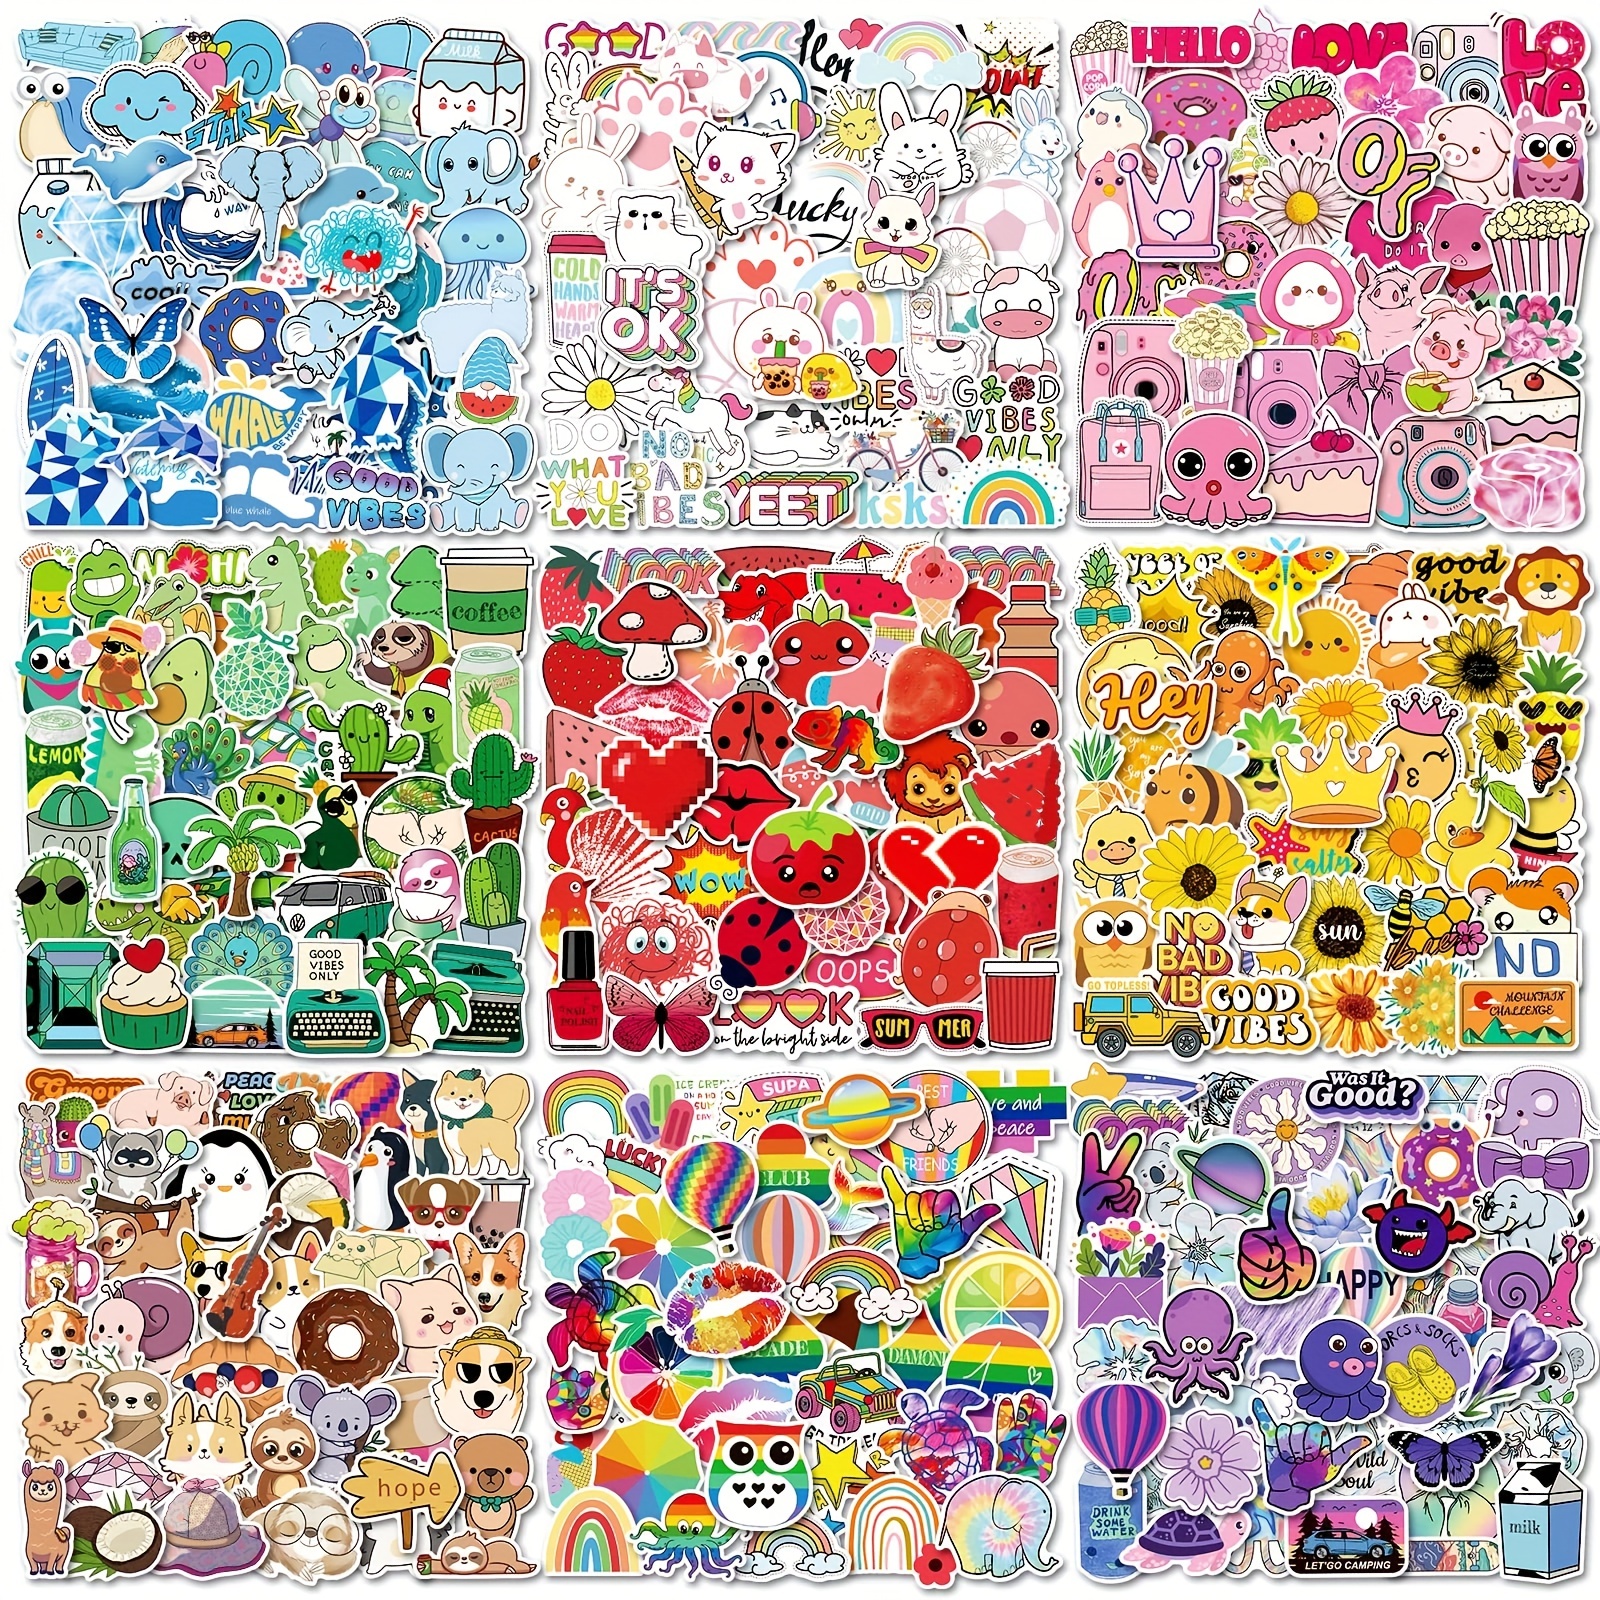 200 Stickers for Kids, Water Bottle Stickers, Vinyl Waterproof Scrapbook  Cute Bulk Stickers Pack for Laptop Skateboard Computer Guitar, Mixed  Colorful